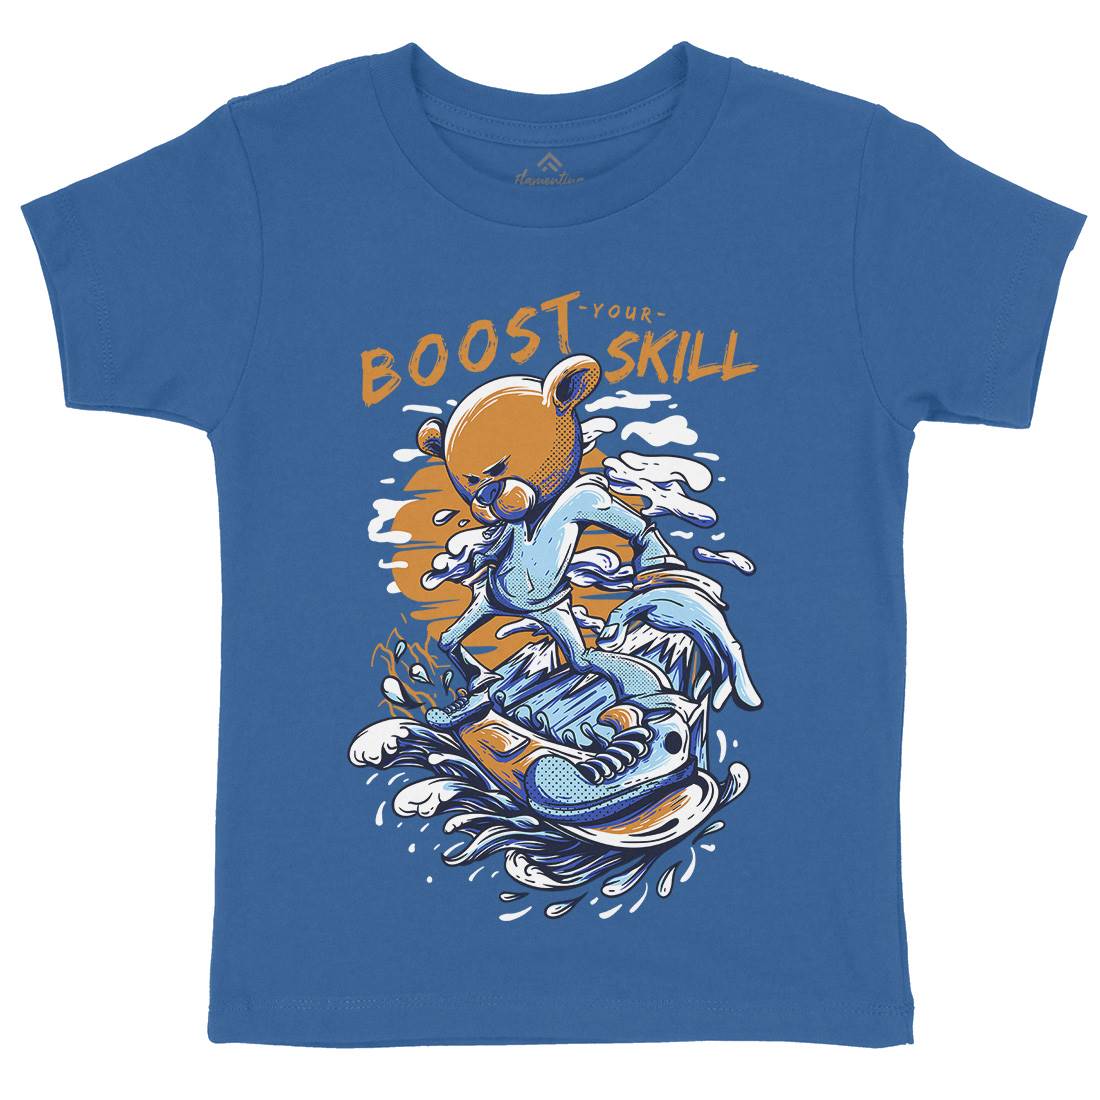 Boost Your Skill Kids Crew Neck T-Shirt Surf D716